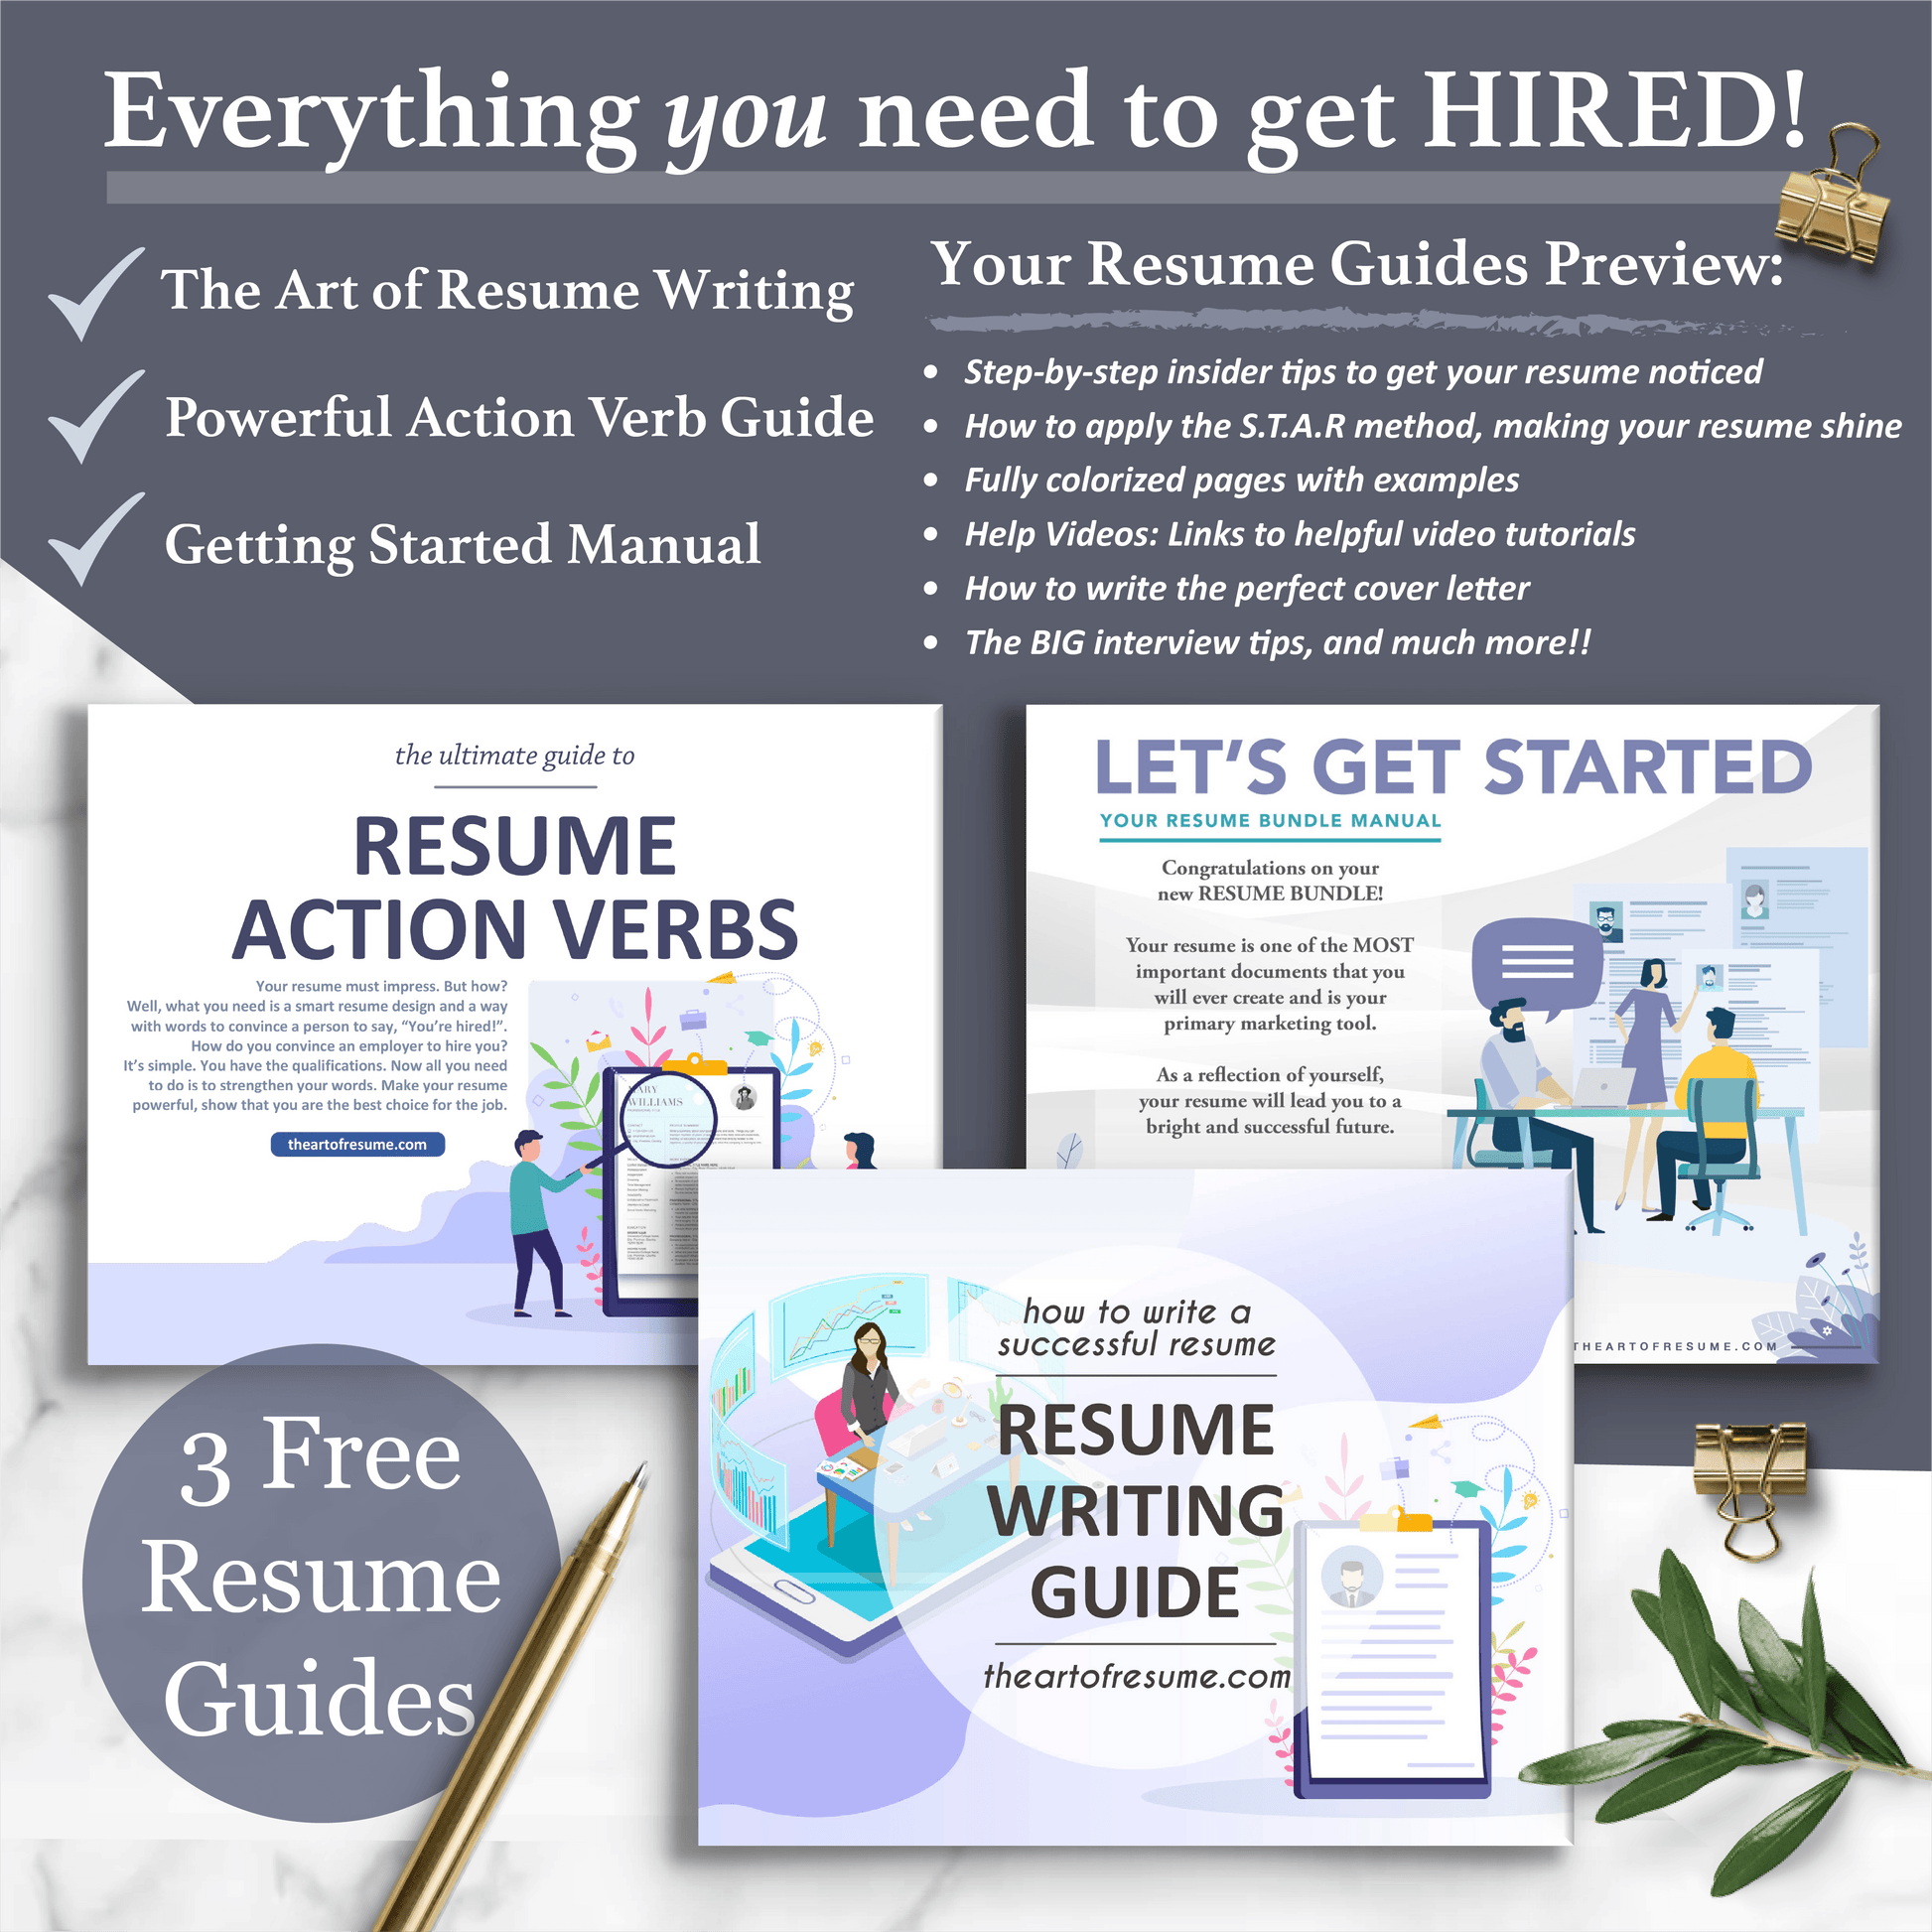 Professional Resume Designs | Matching Cover Letter | Free Resume Writing Guide - The Art of Resume